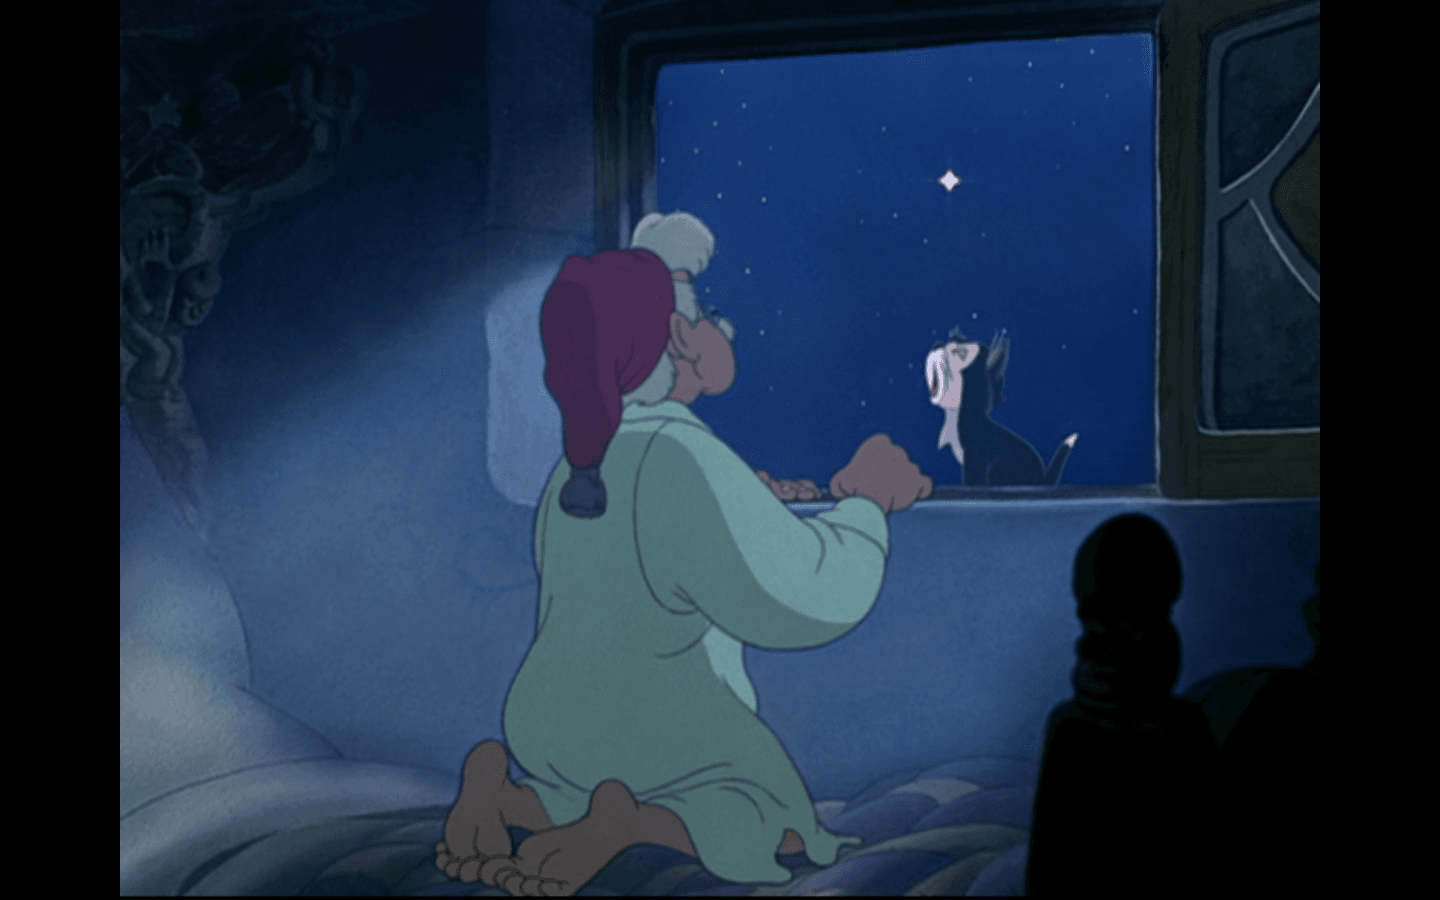 3. When You Wish Upon a Star